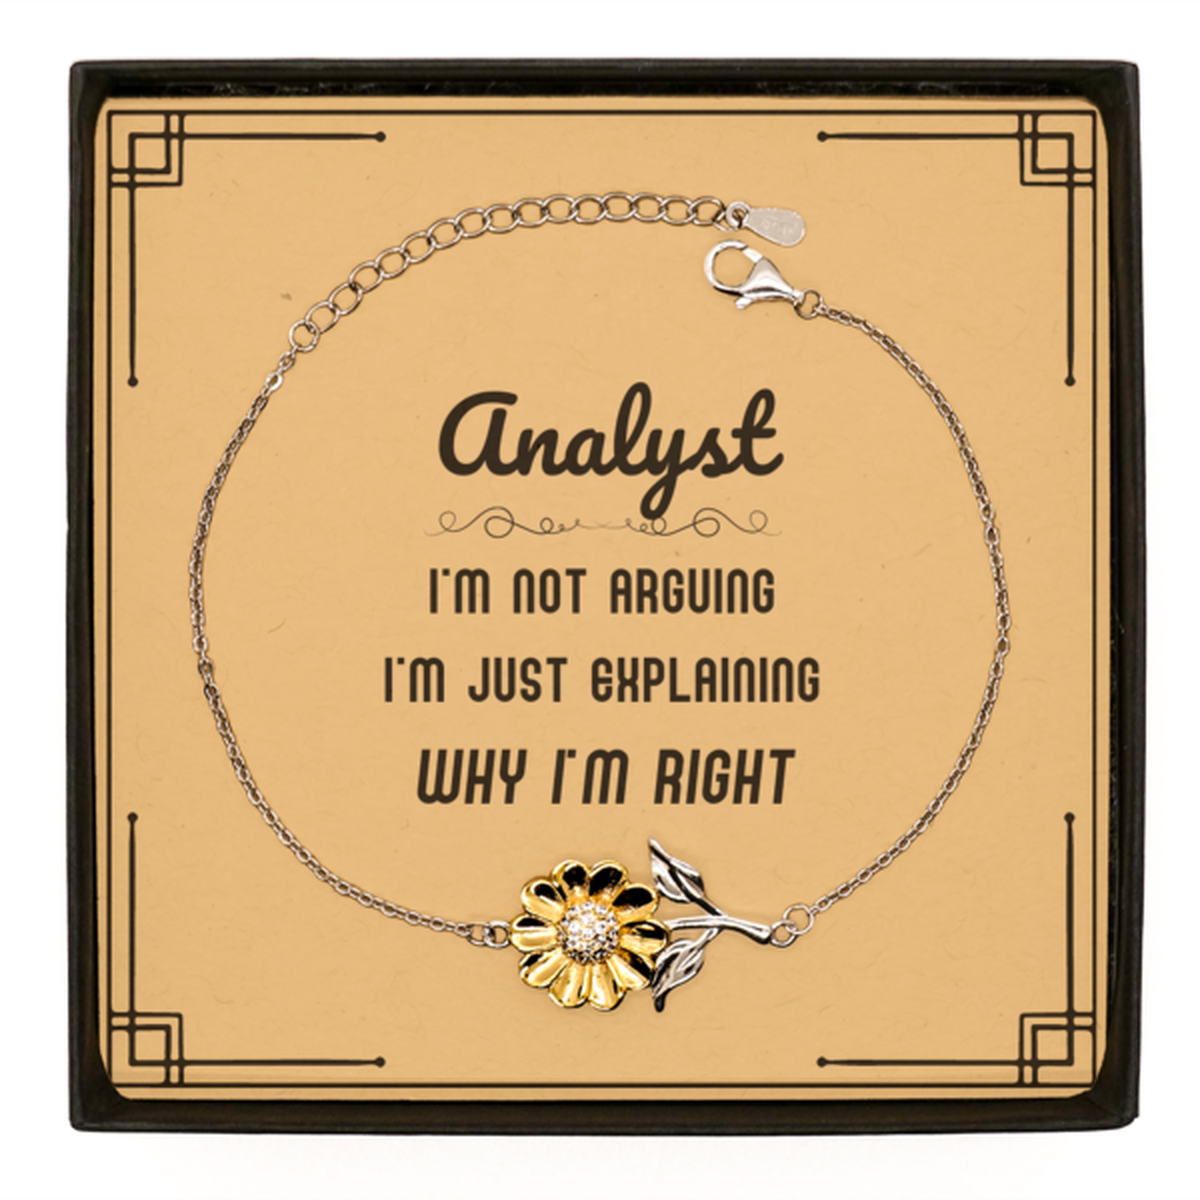 Analyst I'm not Arguing. I'm Just Explaining Why I'm RIGHT Sunflower Bracelet, Funny Saying Quote Analyst Gifts For Analyst Message Card Graduation Birthday Christmas Gifts for Men Women Coworker